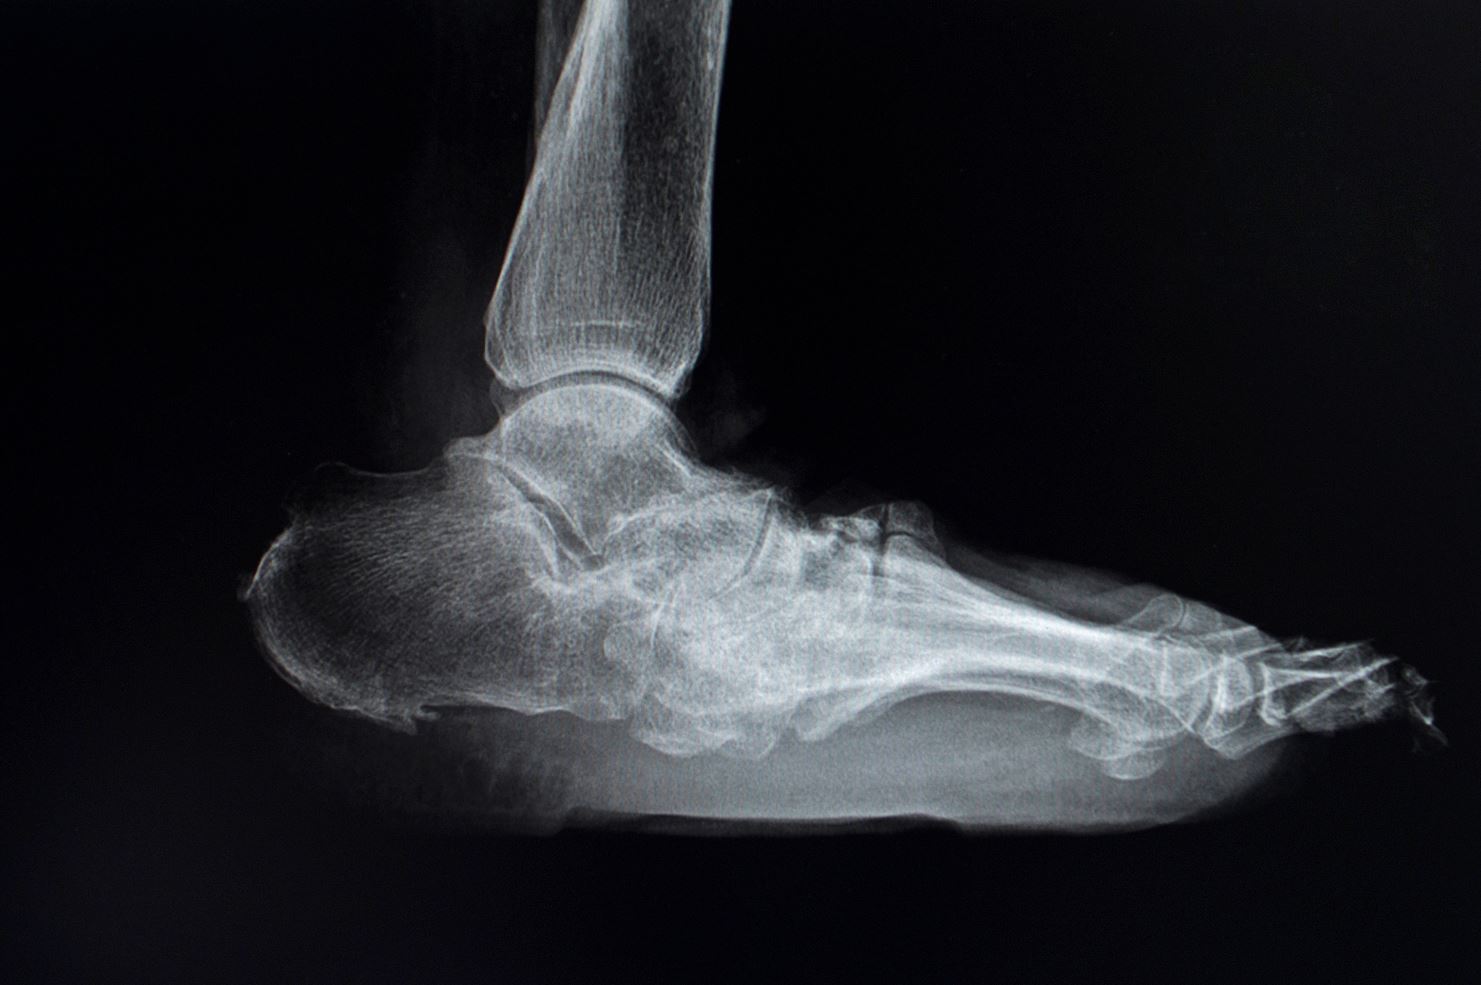 Charcot's Foot X-ray showing fractures and dislocation of the bones and joints.